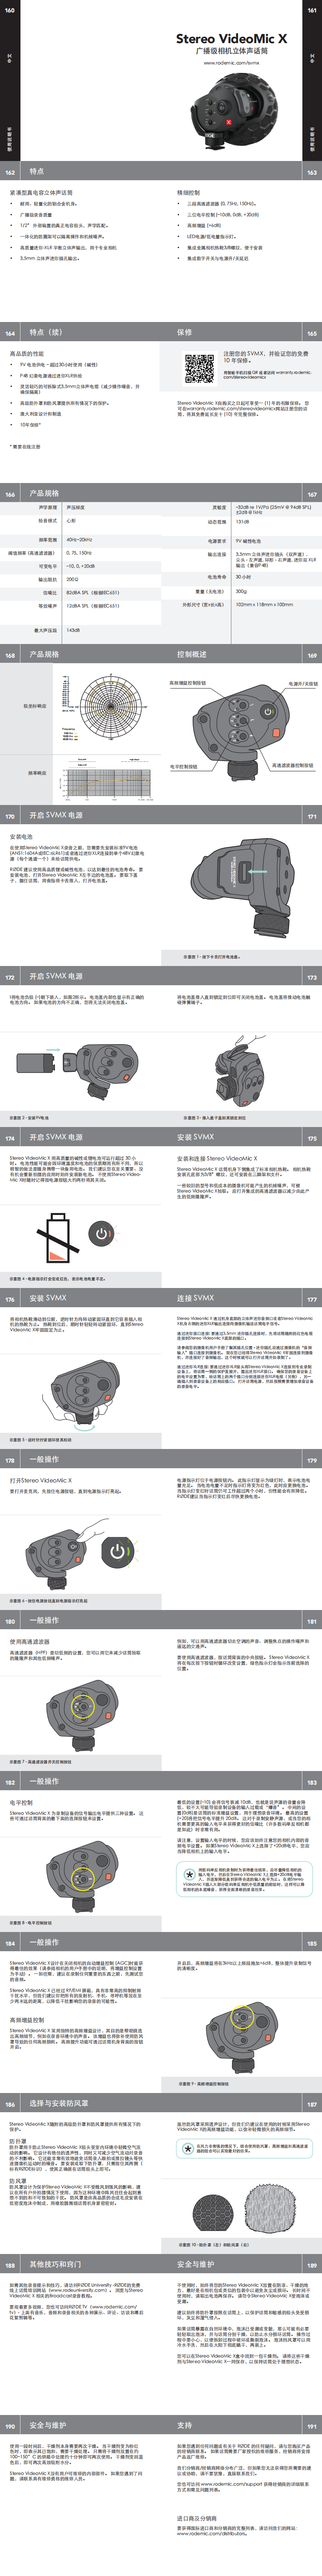 Stereo VideoMic X_manual_Chinese_0.png